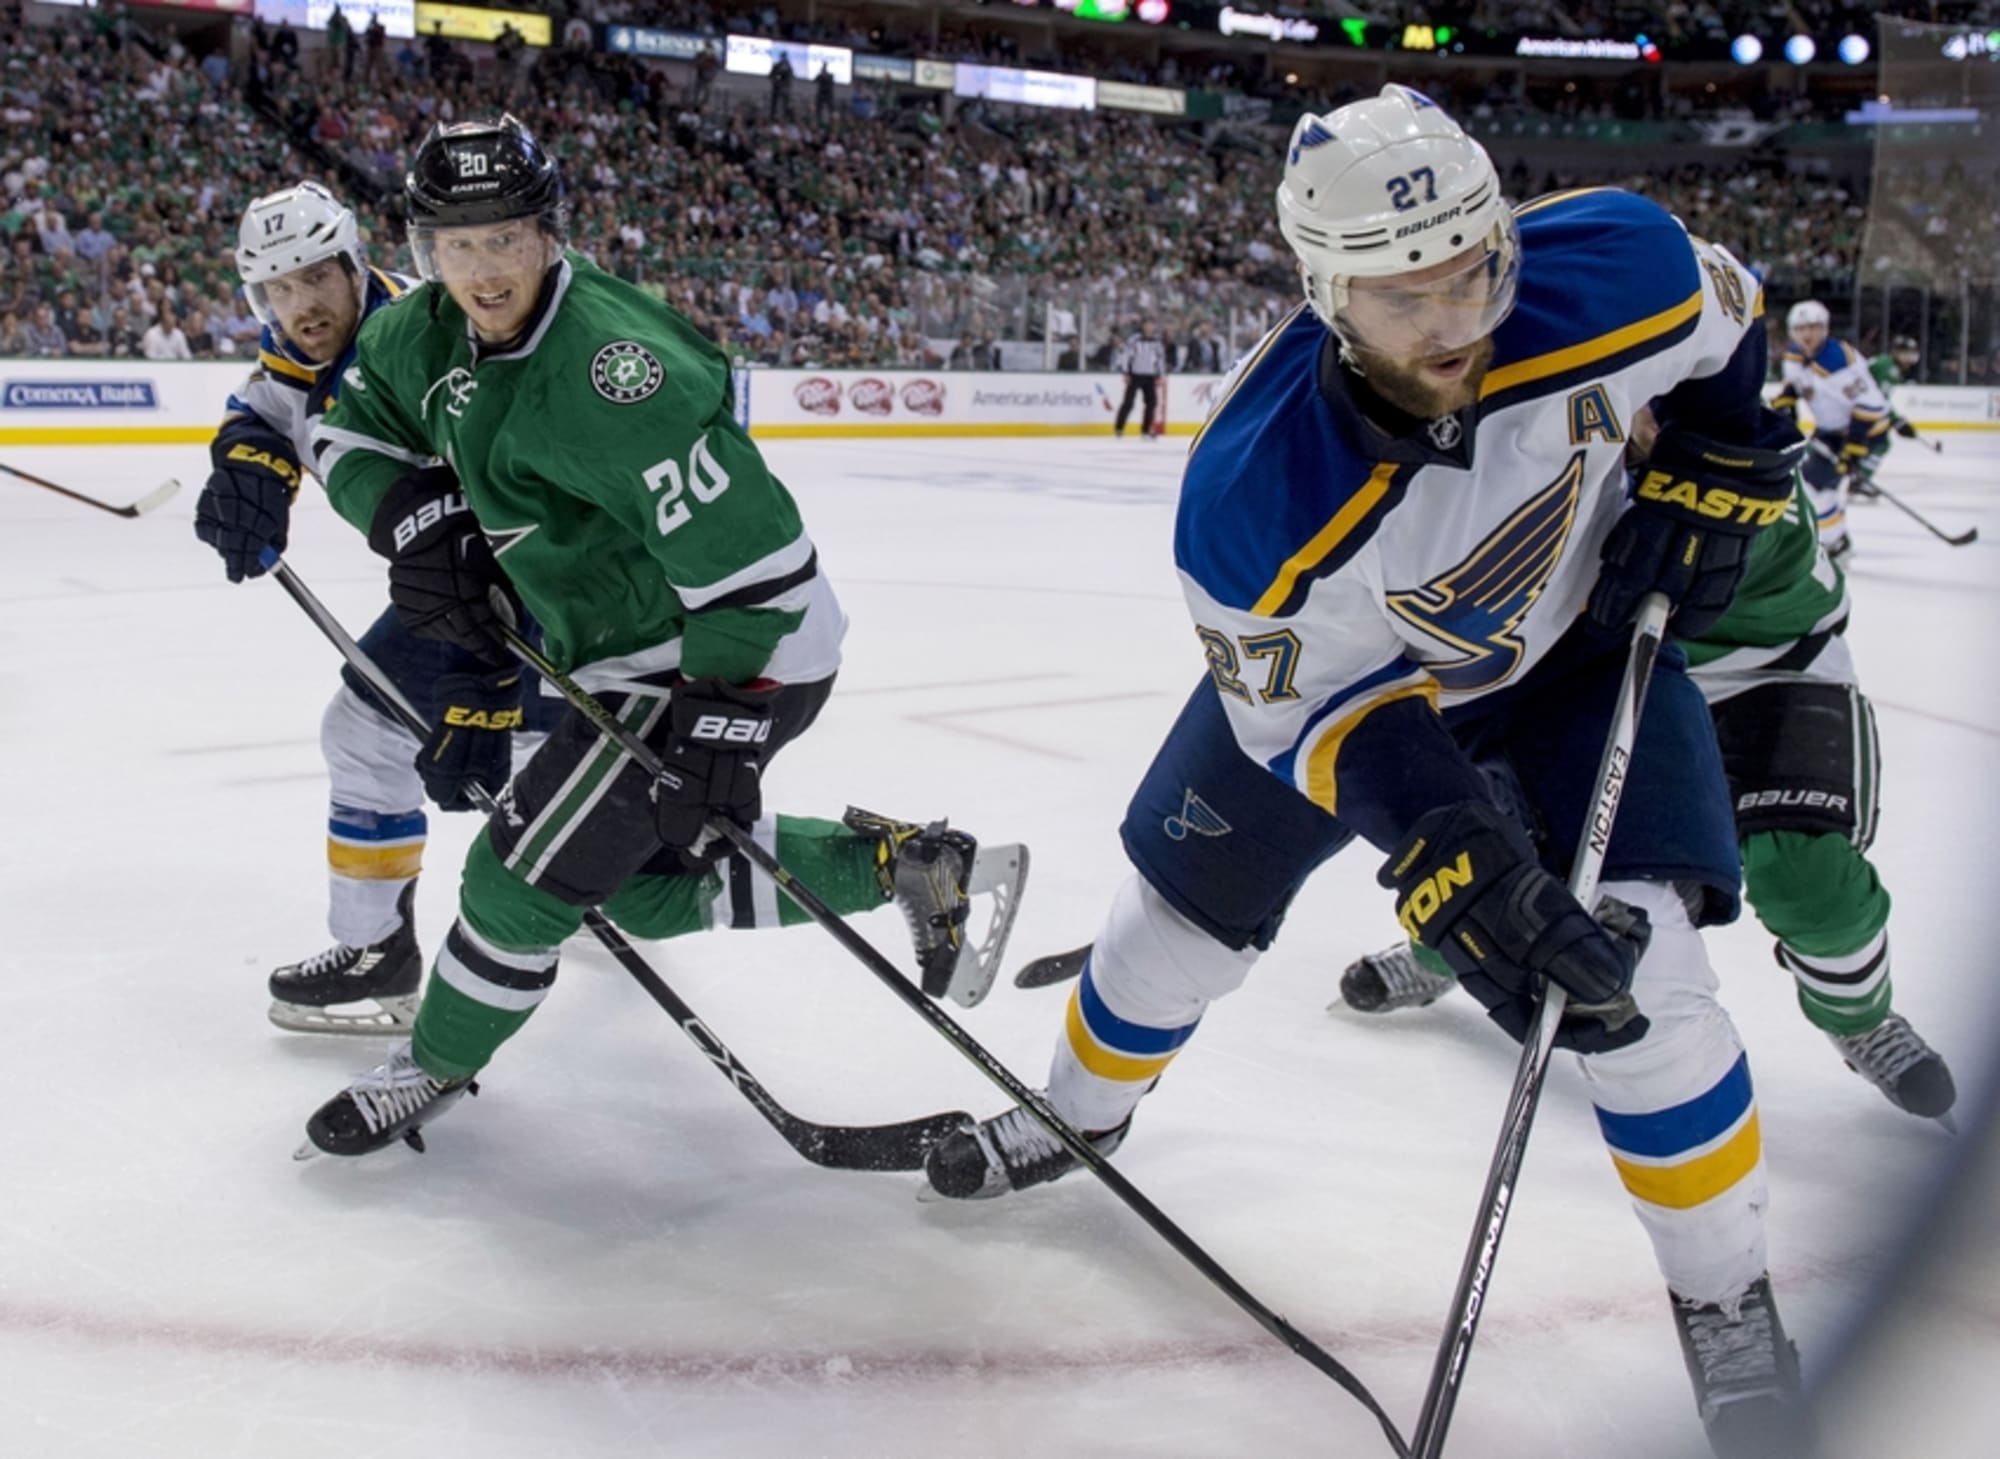 The St. Louis Blues are counting on motivated players to help them return  to the playoffs, Hockey